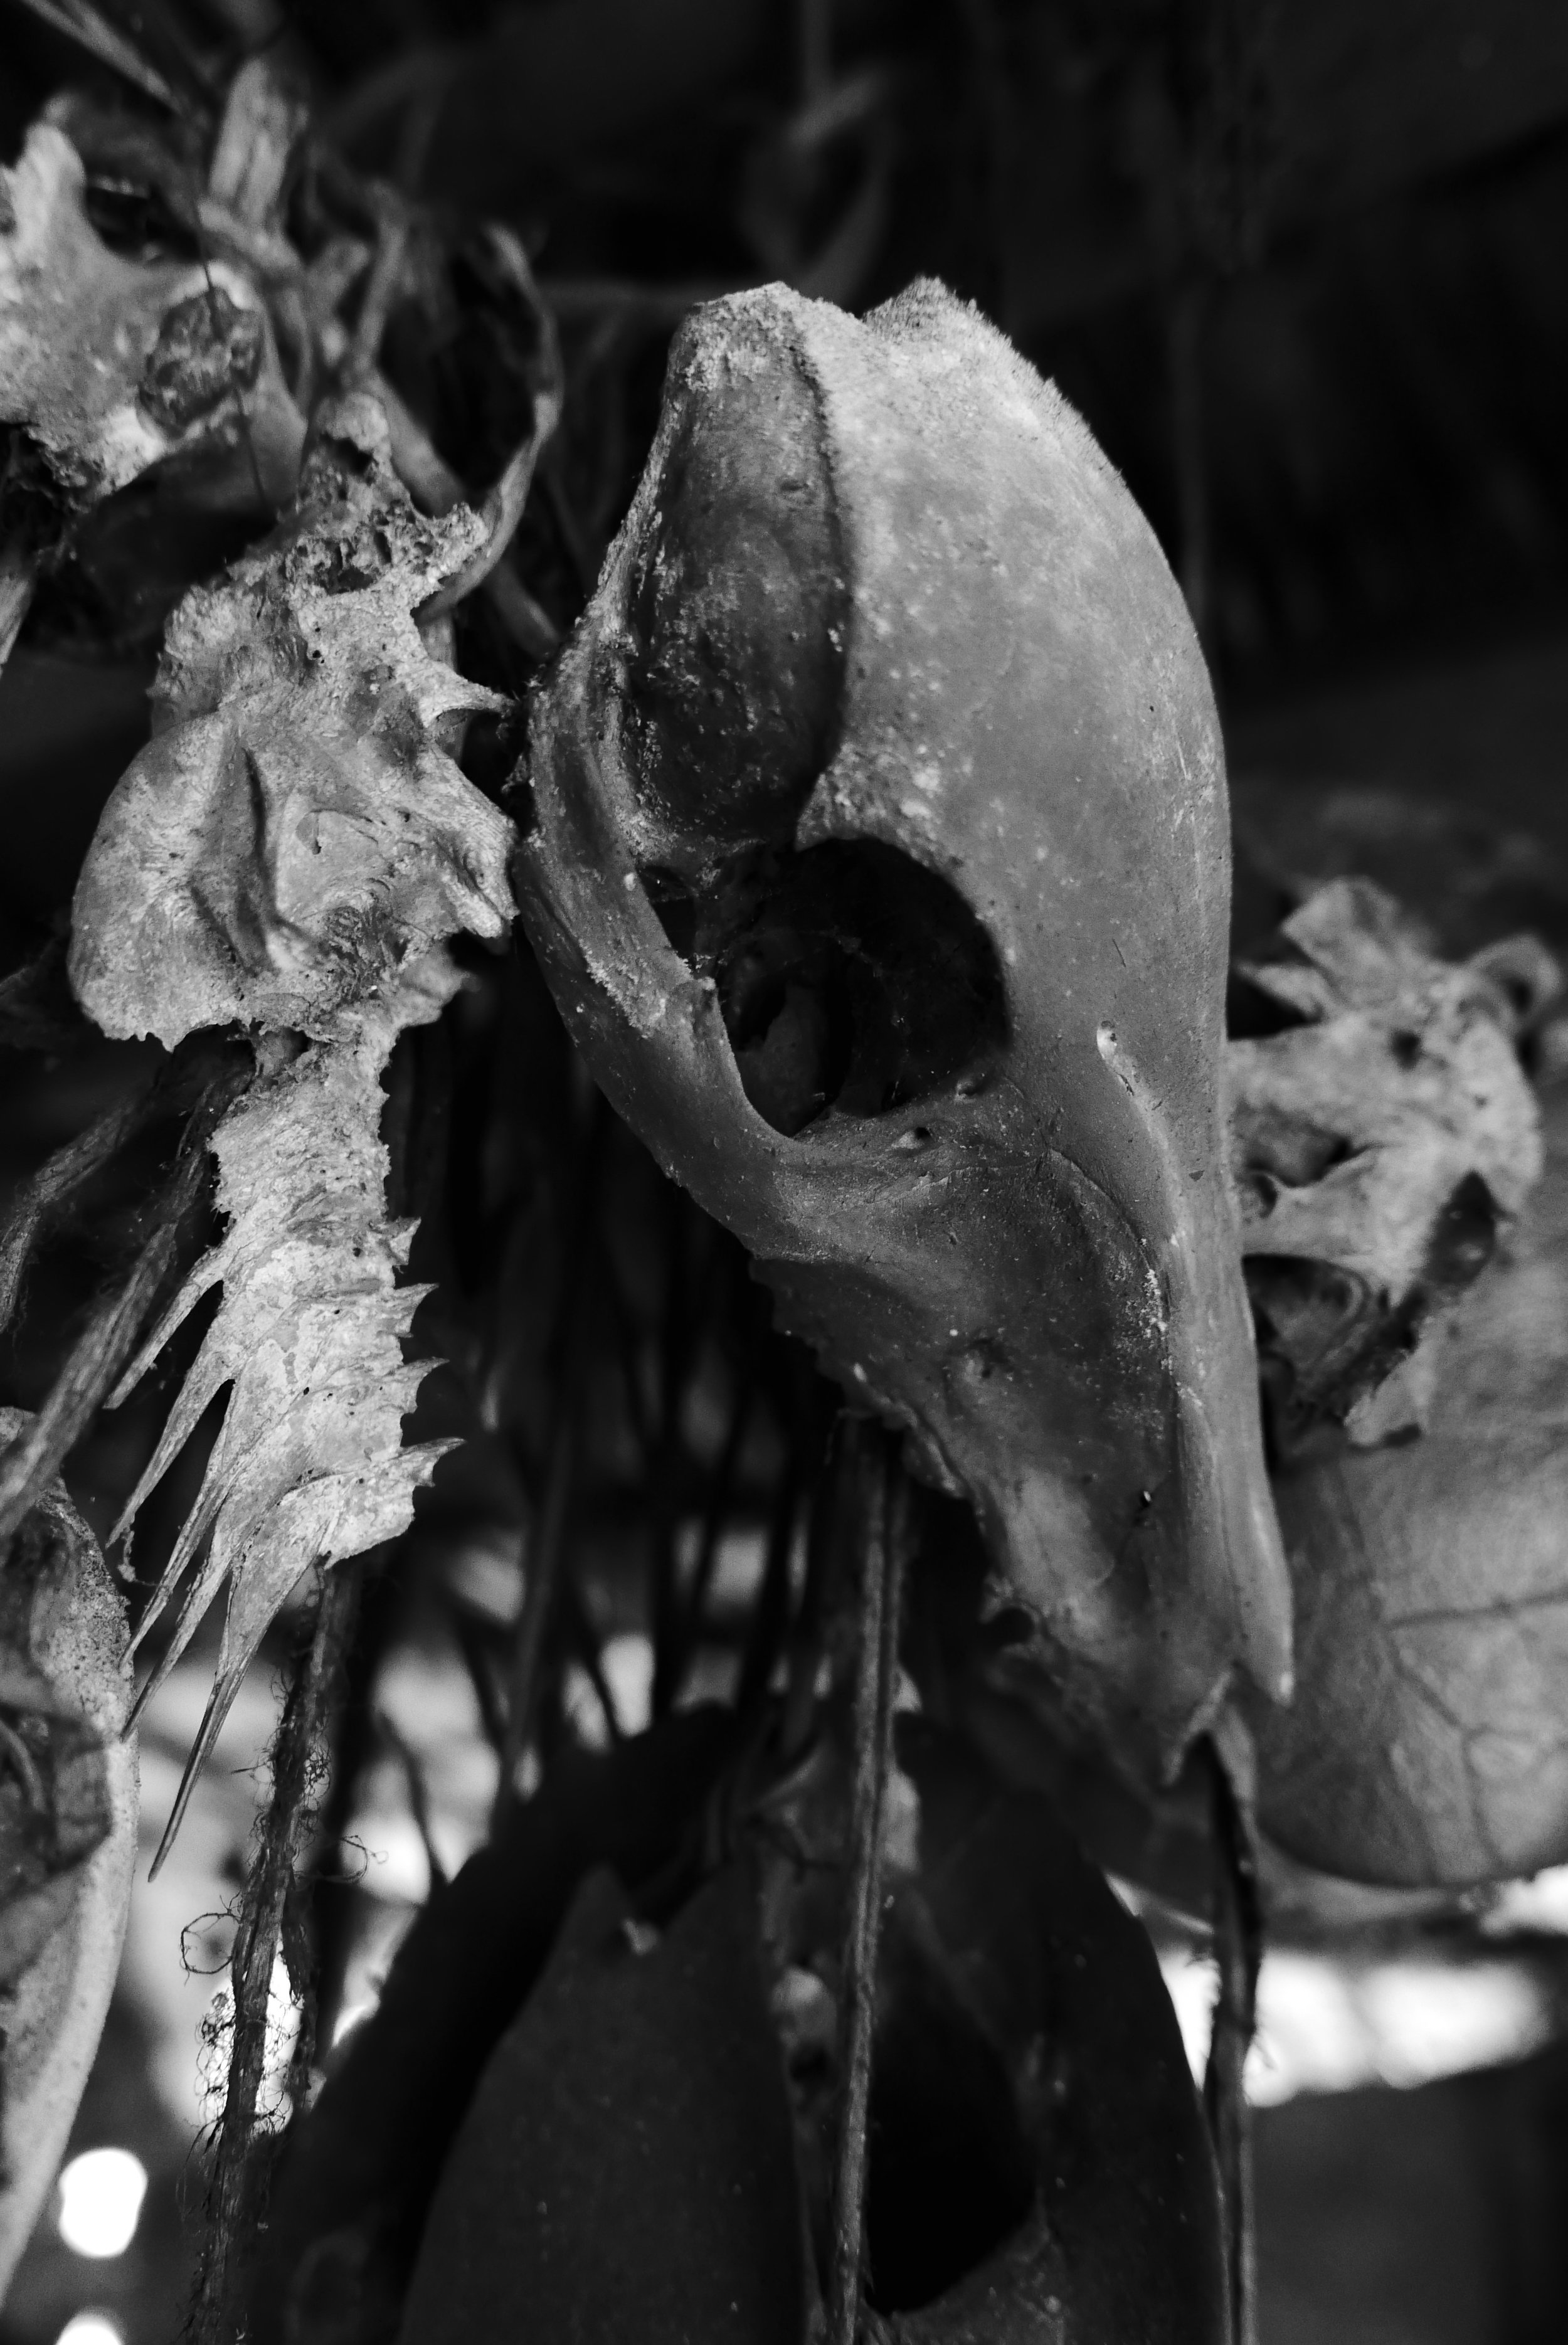  The Korowai traditionally hang skulls and bones from their past kills as ornamental decoration in the rafters of their treehouse homes 